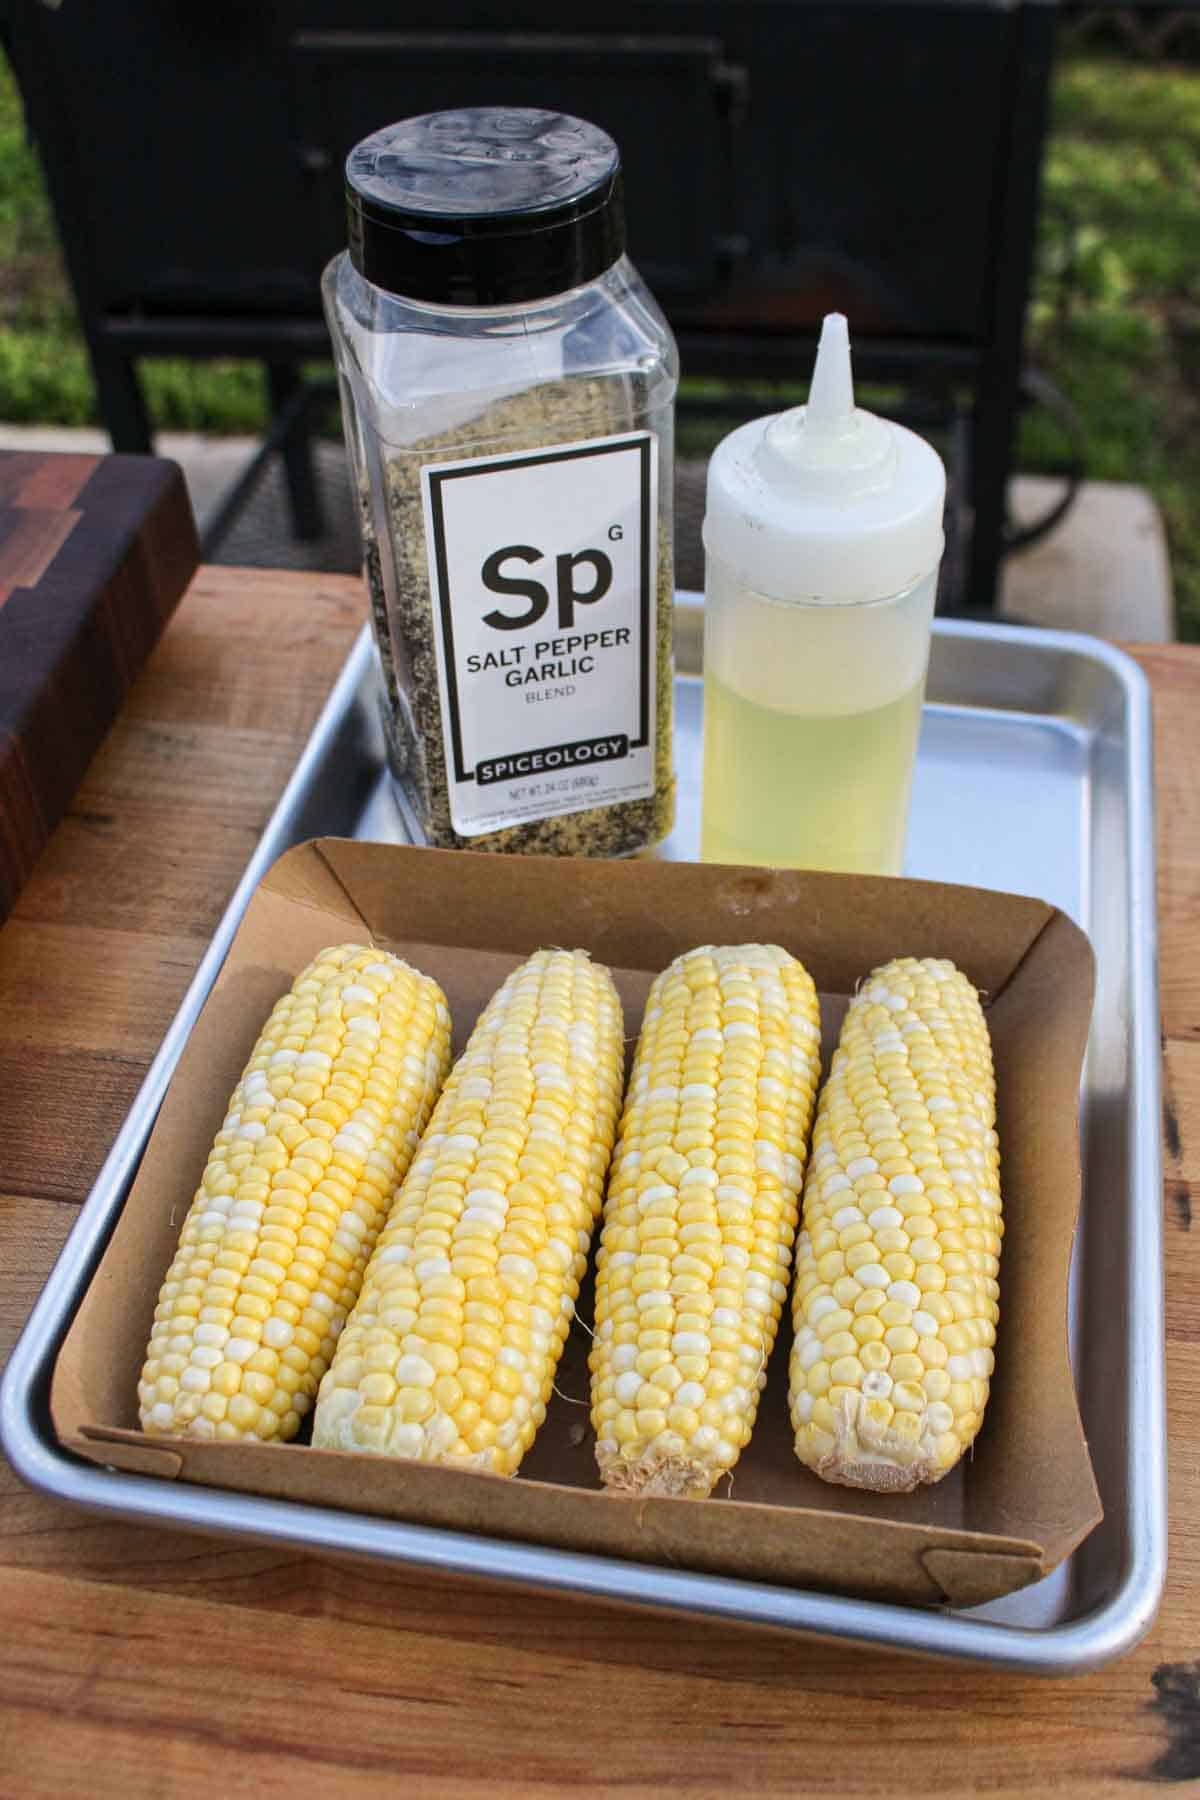 The ingredients for the grilled corn.